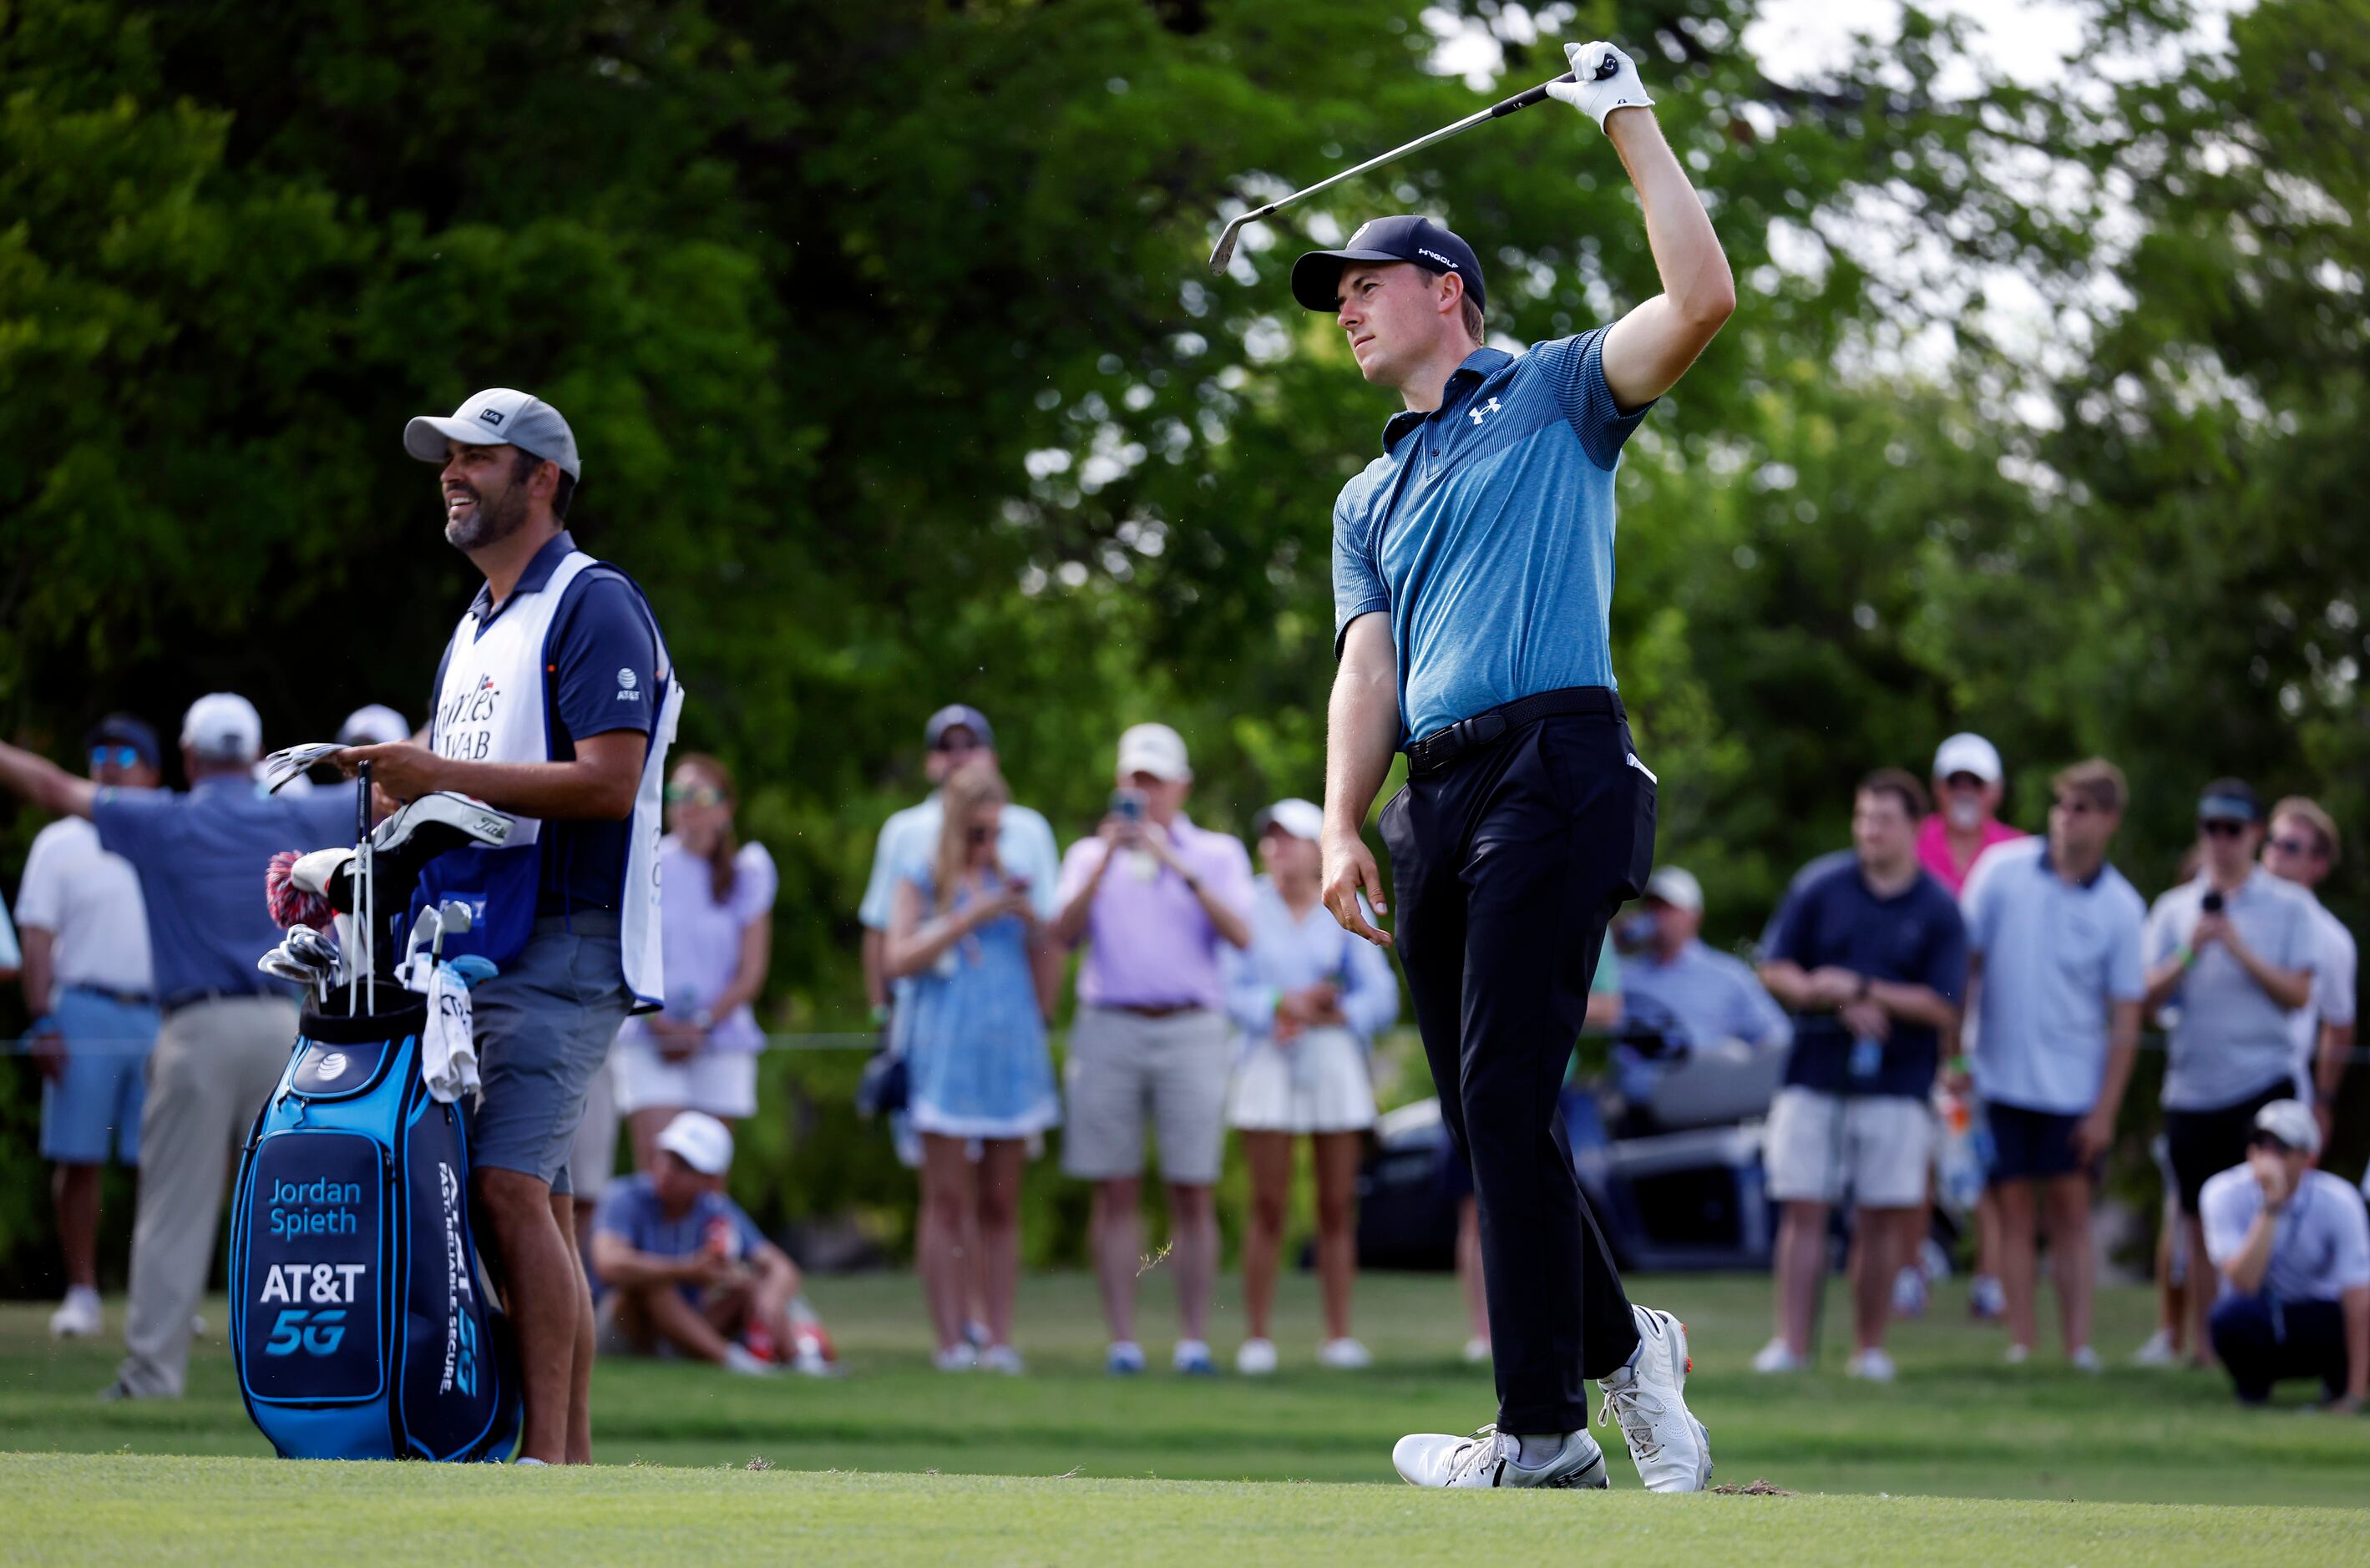 Professional golfer Jordan Spieth lets go of his swing after hitting an approach shot on No....